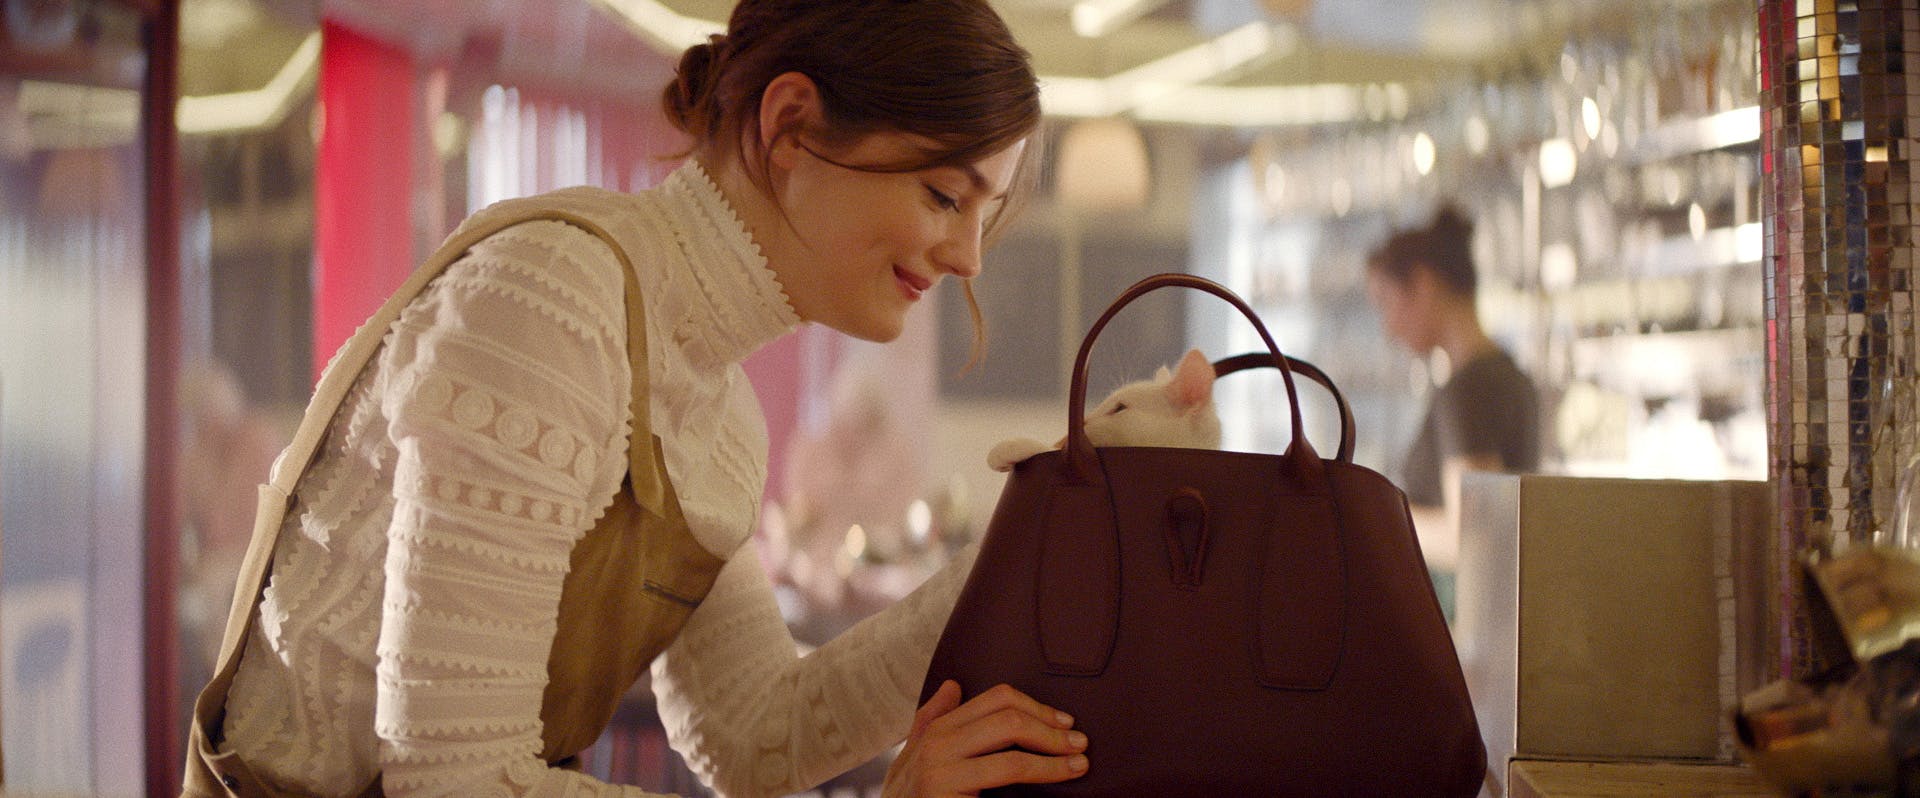 Très Paris is a tale about two Parisian women and two Longchamp bags  captured in a whimsic